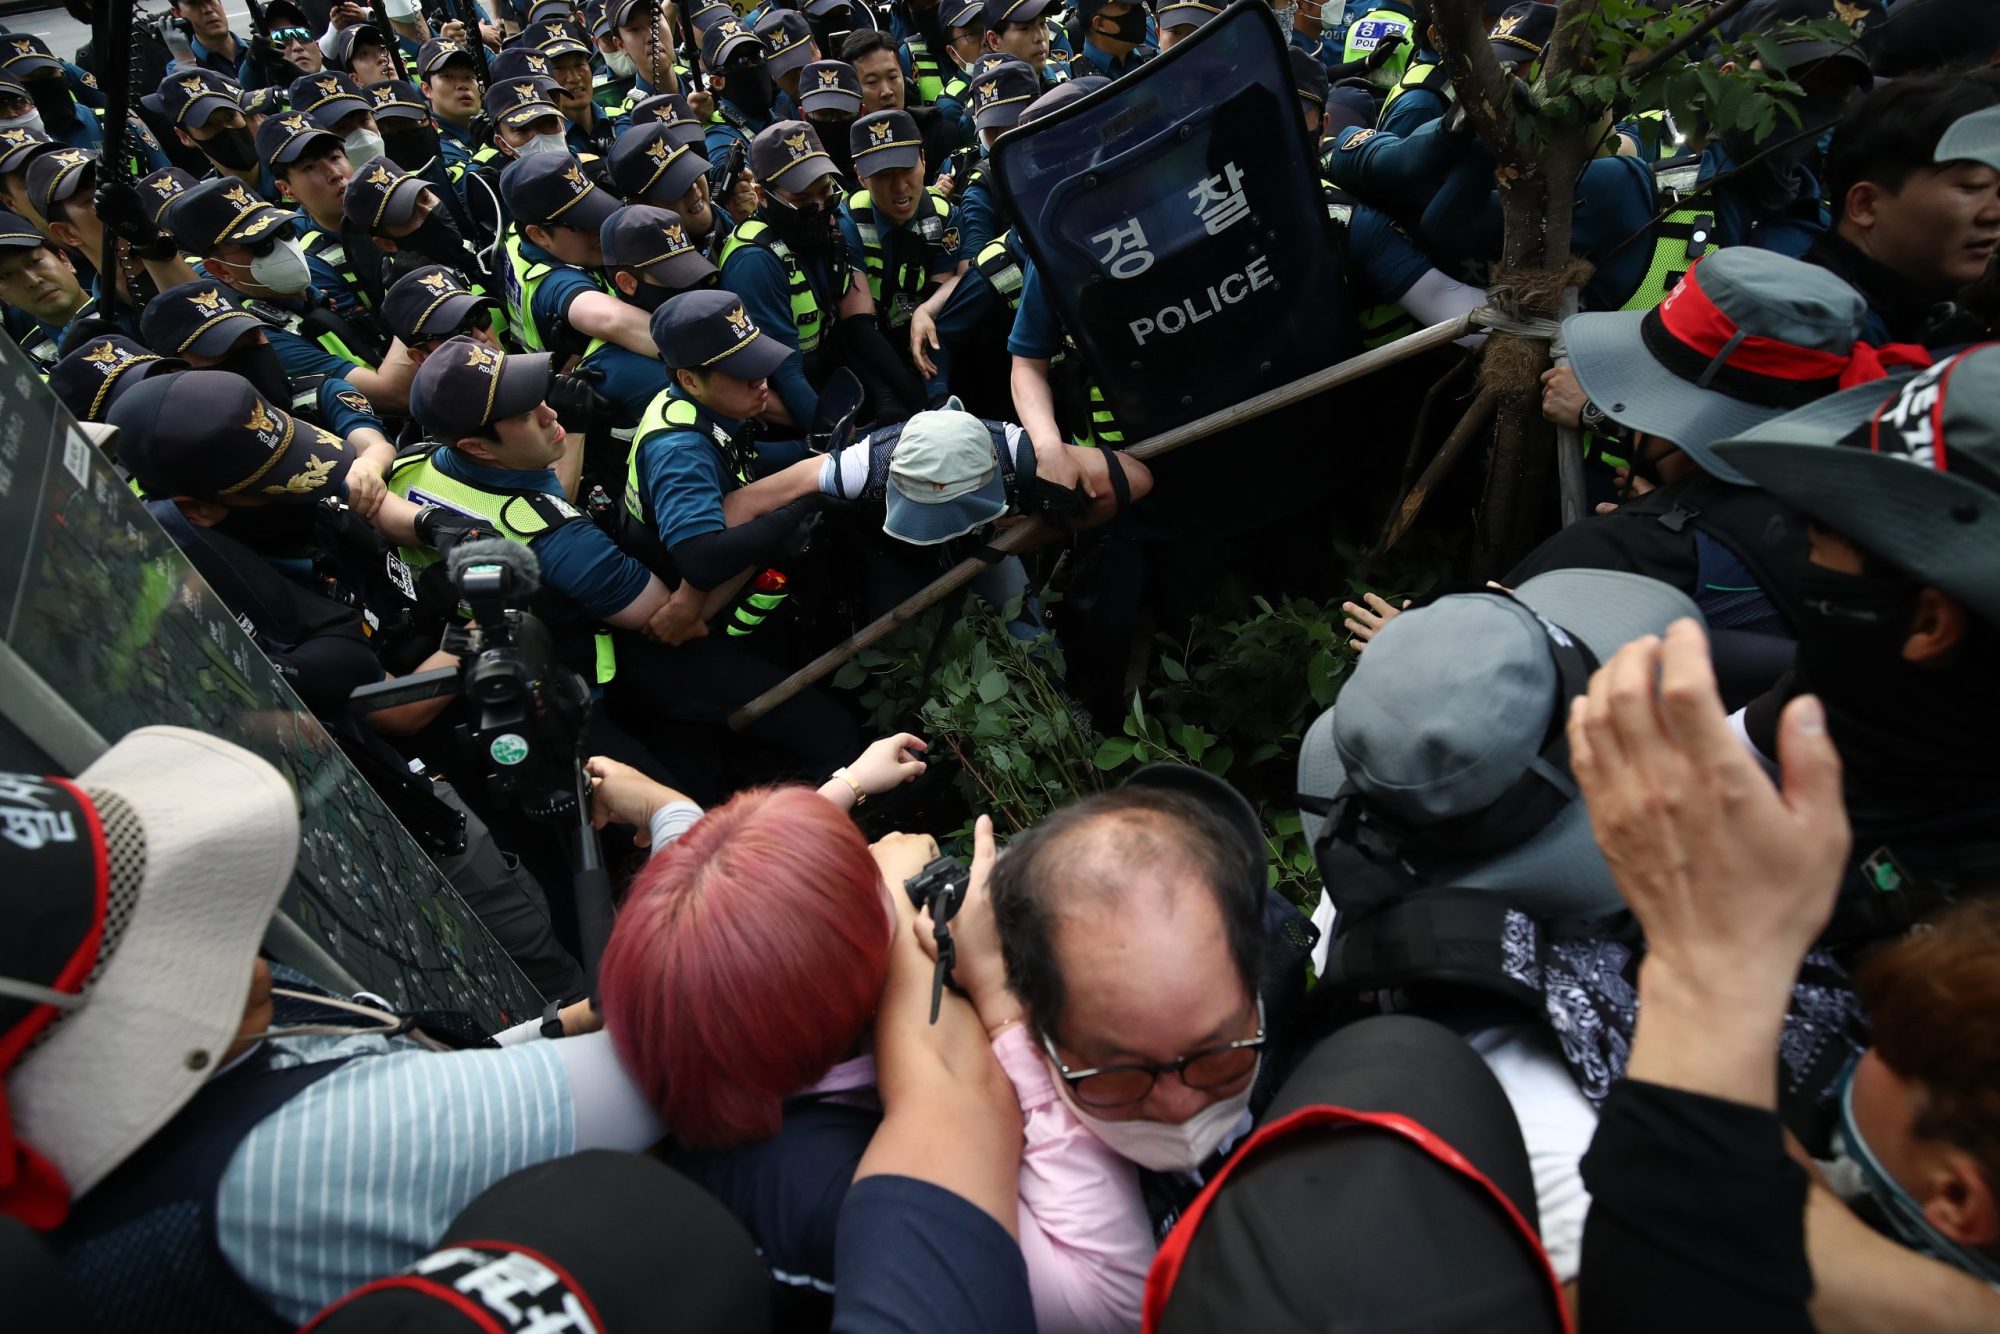 A wave of riot-shield wielding police officers descends upon a group of trade unionists, who have their arms raised in self defense.